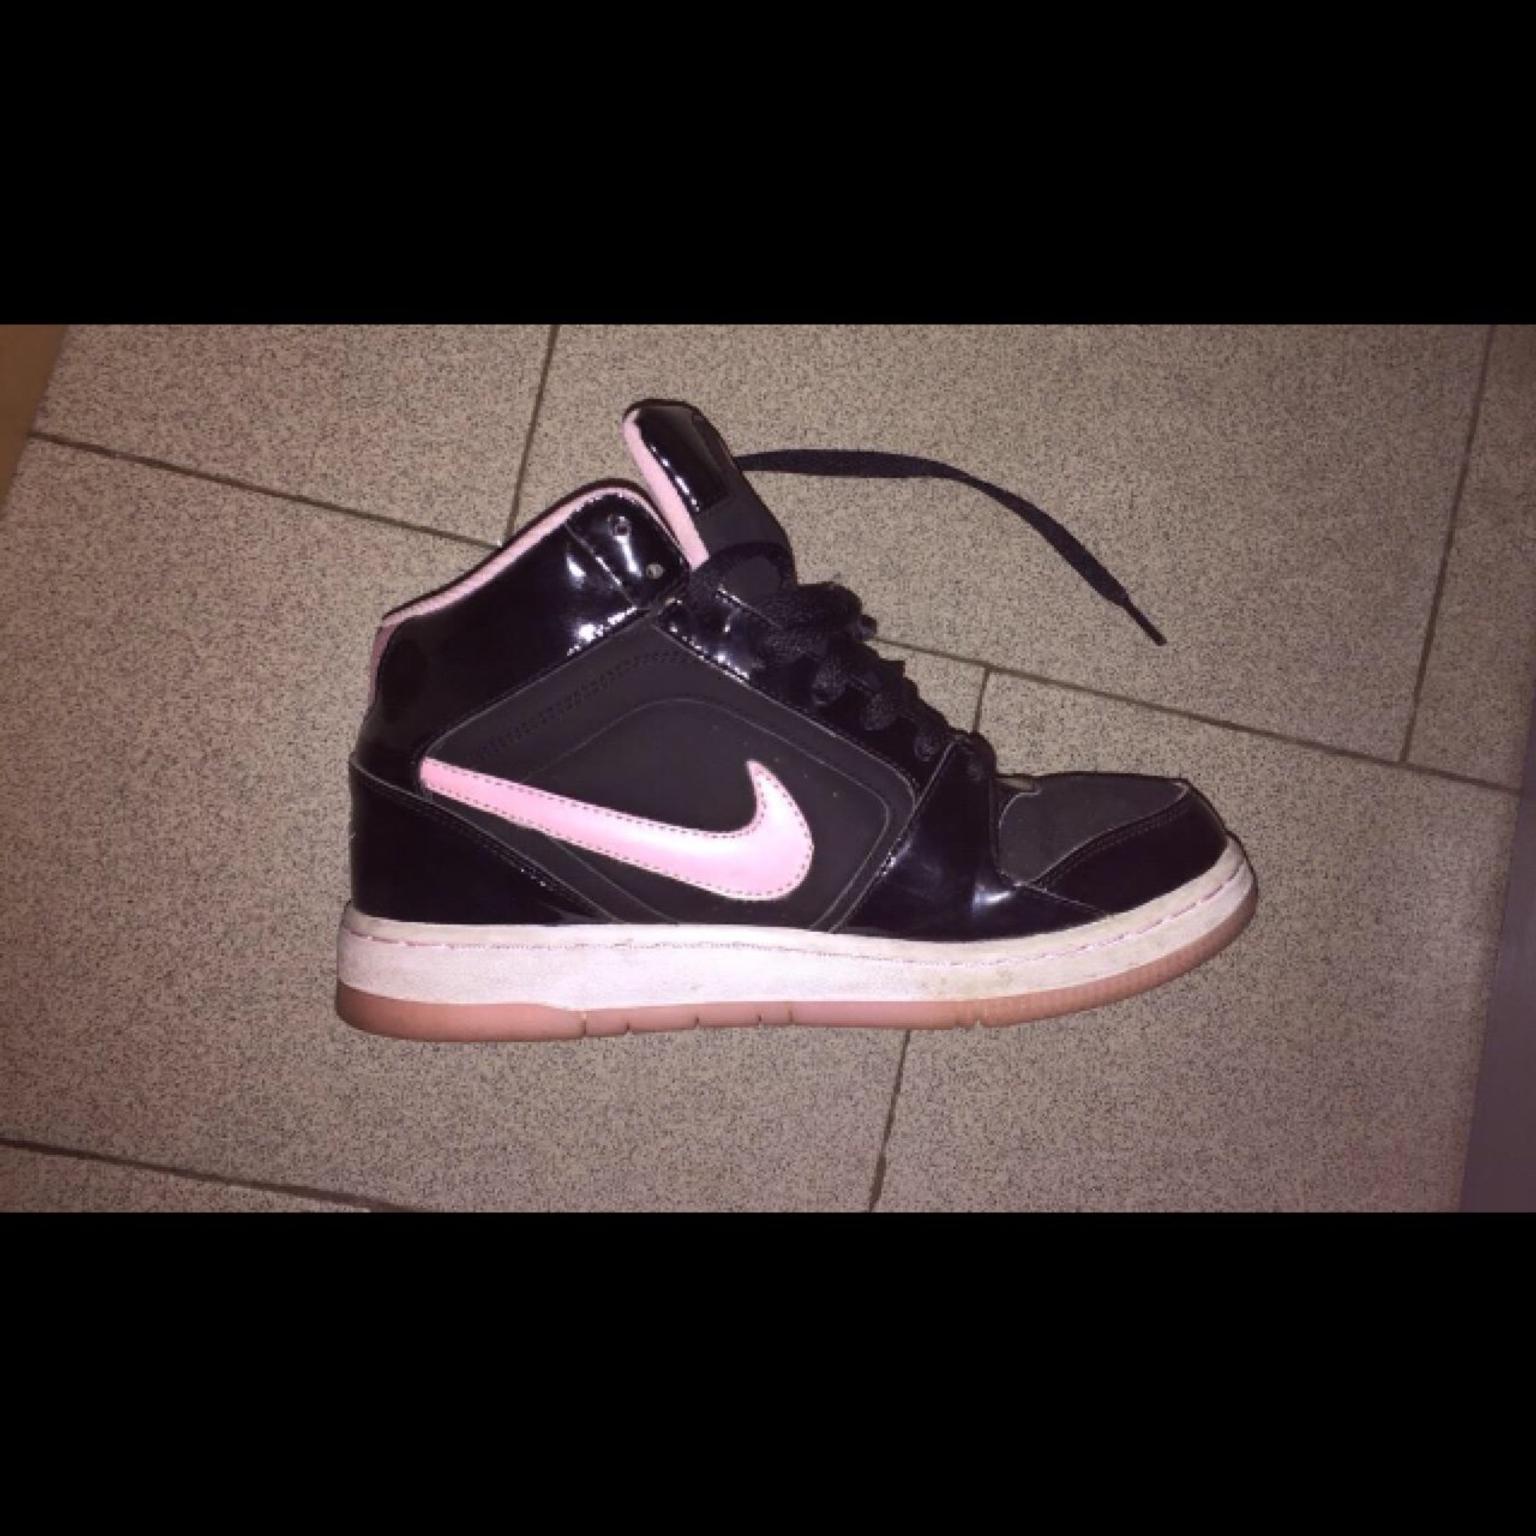 Nike Air Force 36,5 Nero e Rosa in 23875 Ronco Briantino for €20.00 for  sale | Shpock